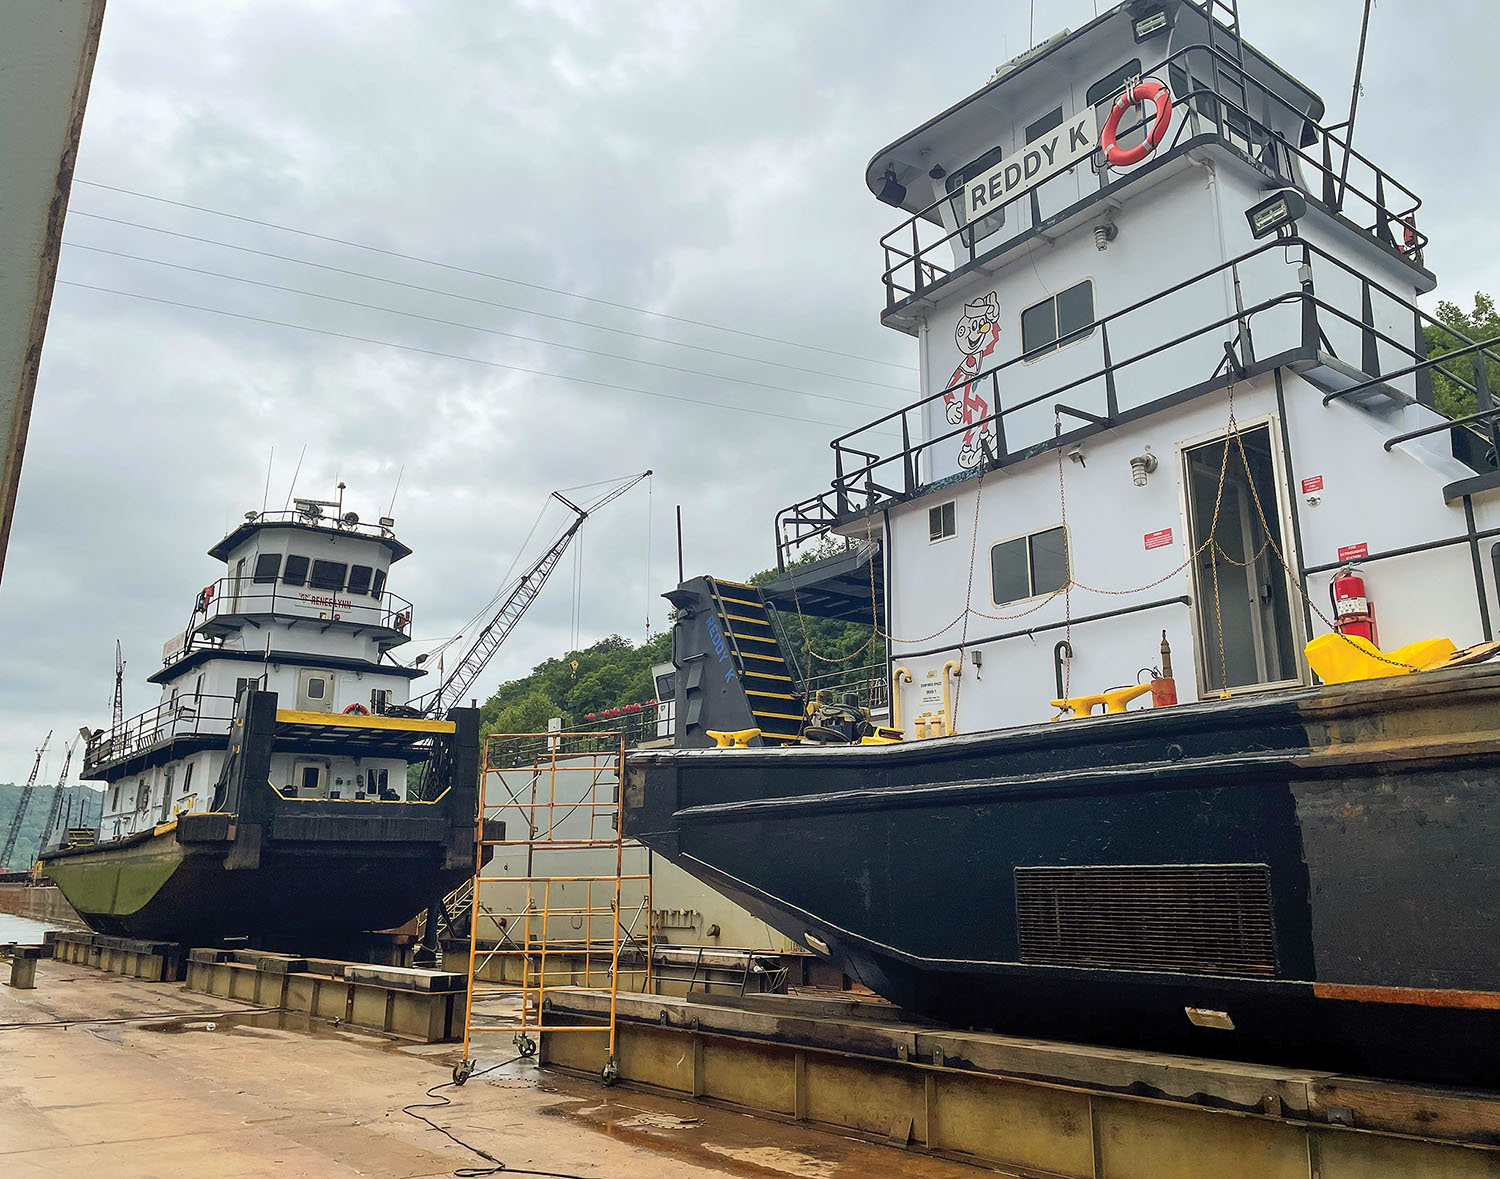 Campbell Transportation Company’s Georgetown Shipyard is wrapping up work on First Energy’s mv. Reddy K (right), the first boat to complete its Subchapter M-required Internal Structural Exam (ISE) and required repairs on Campbell’s drydock. To its left is Campbell’s mv. Renee Lynn. (Photo by Mike O'Rourke)